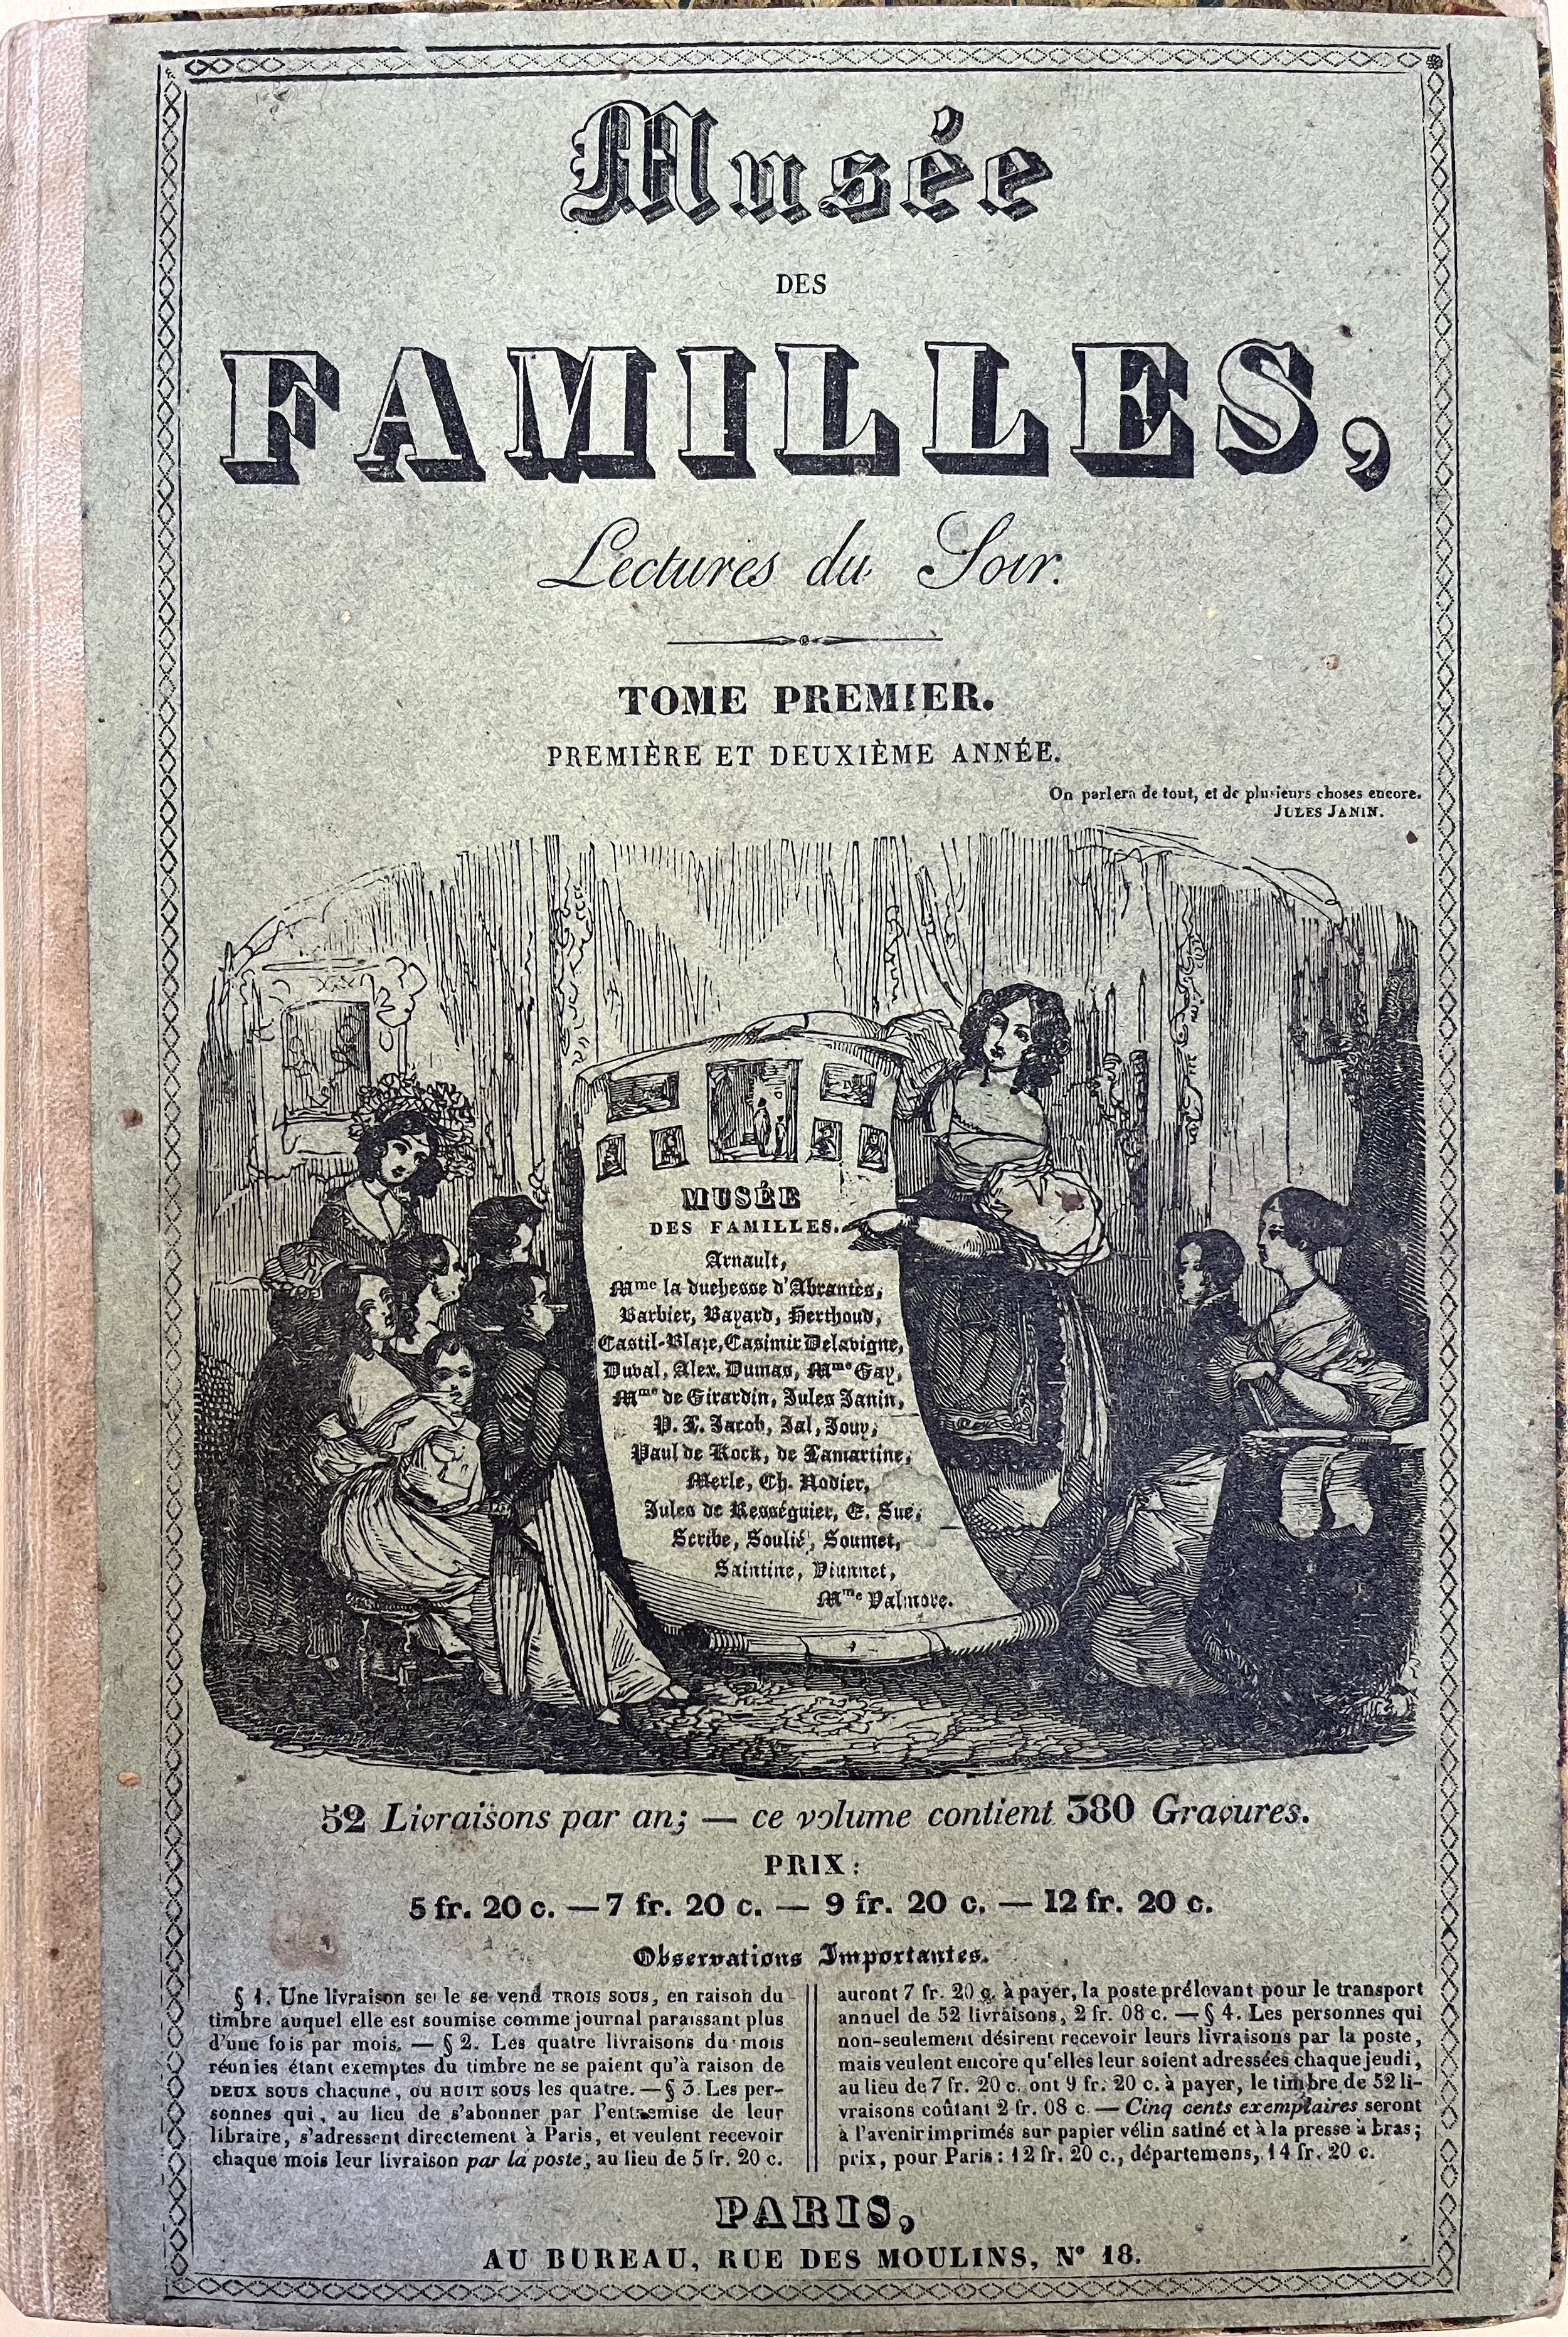 Upper printed wrapper of the first volume of the Musee des familles